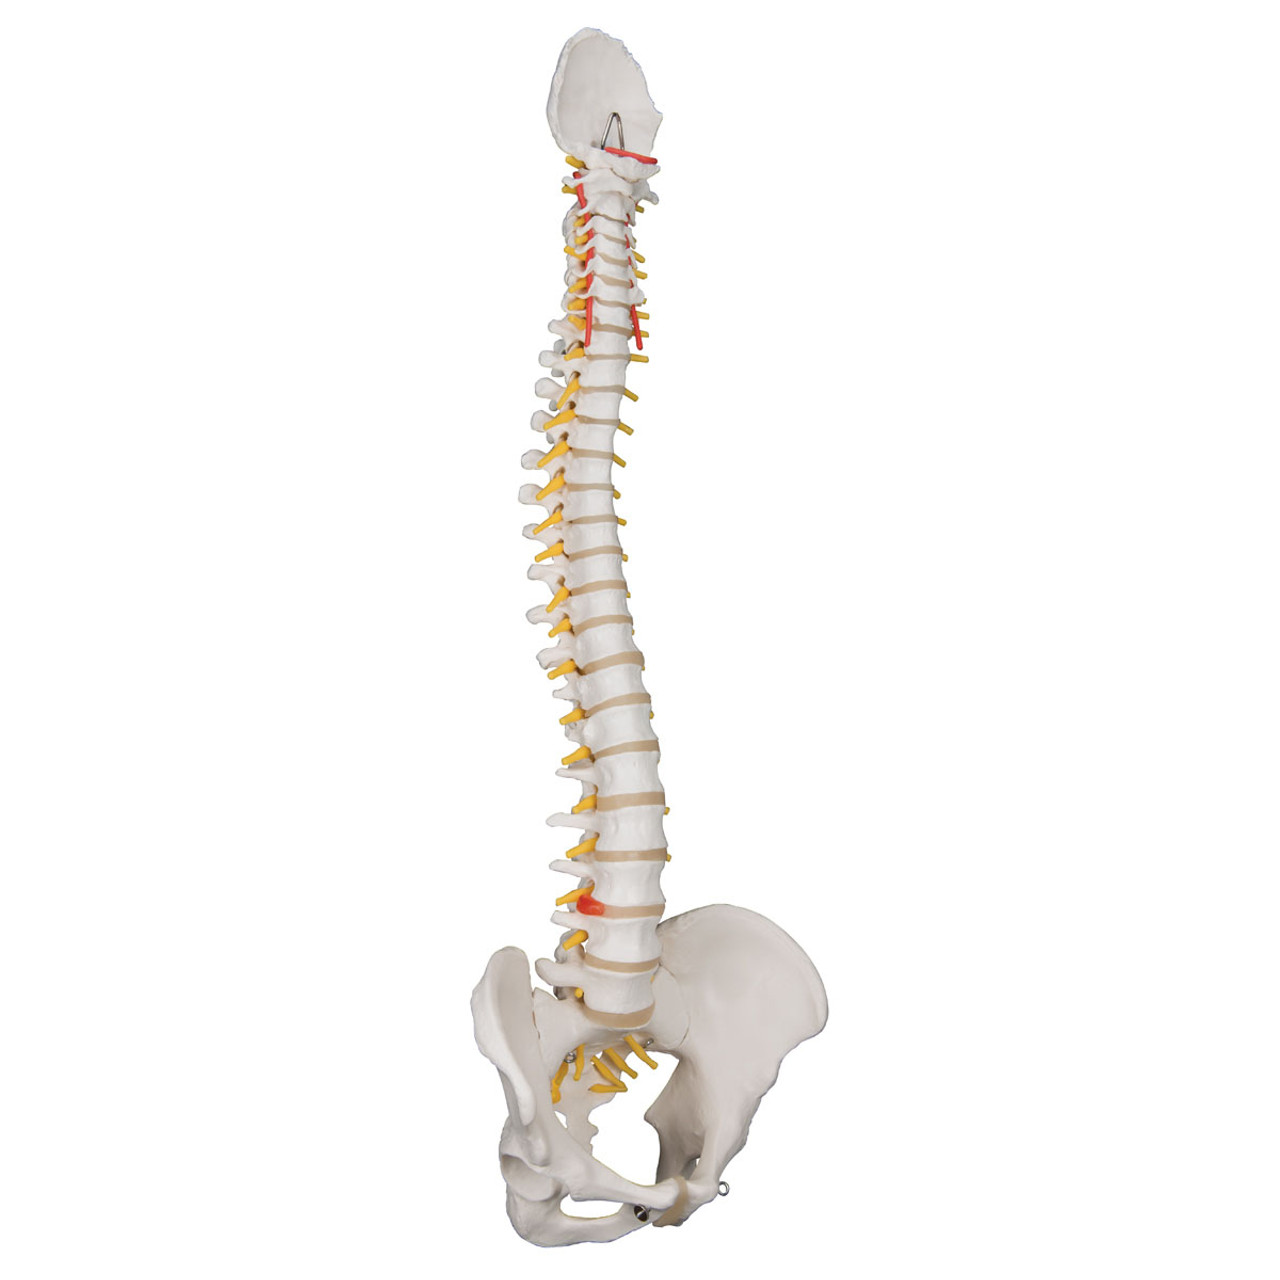 Human Spine Models | ProHealthcareProducts